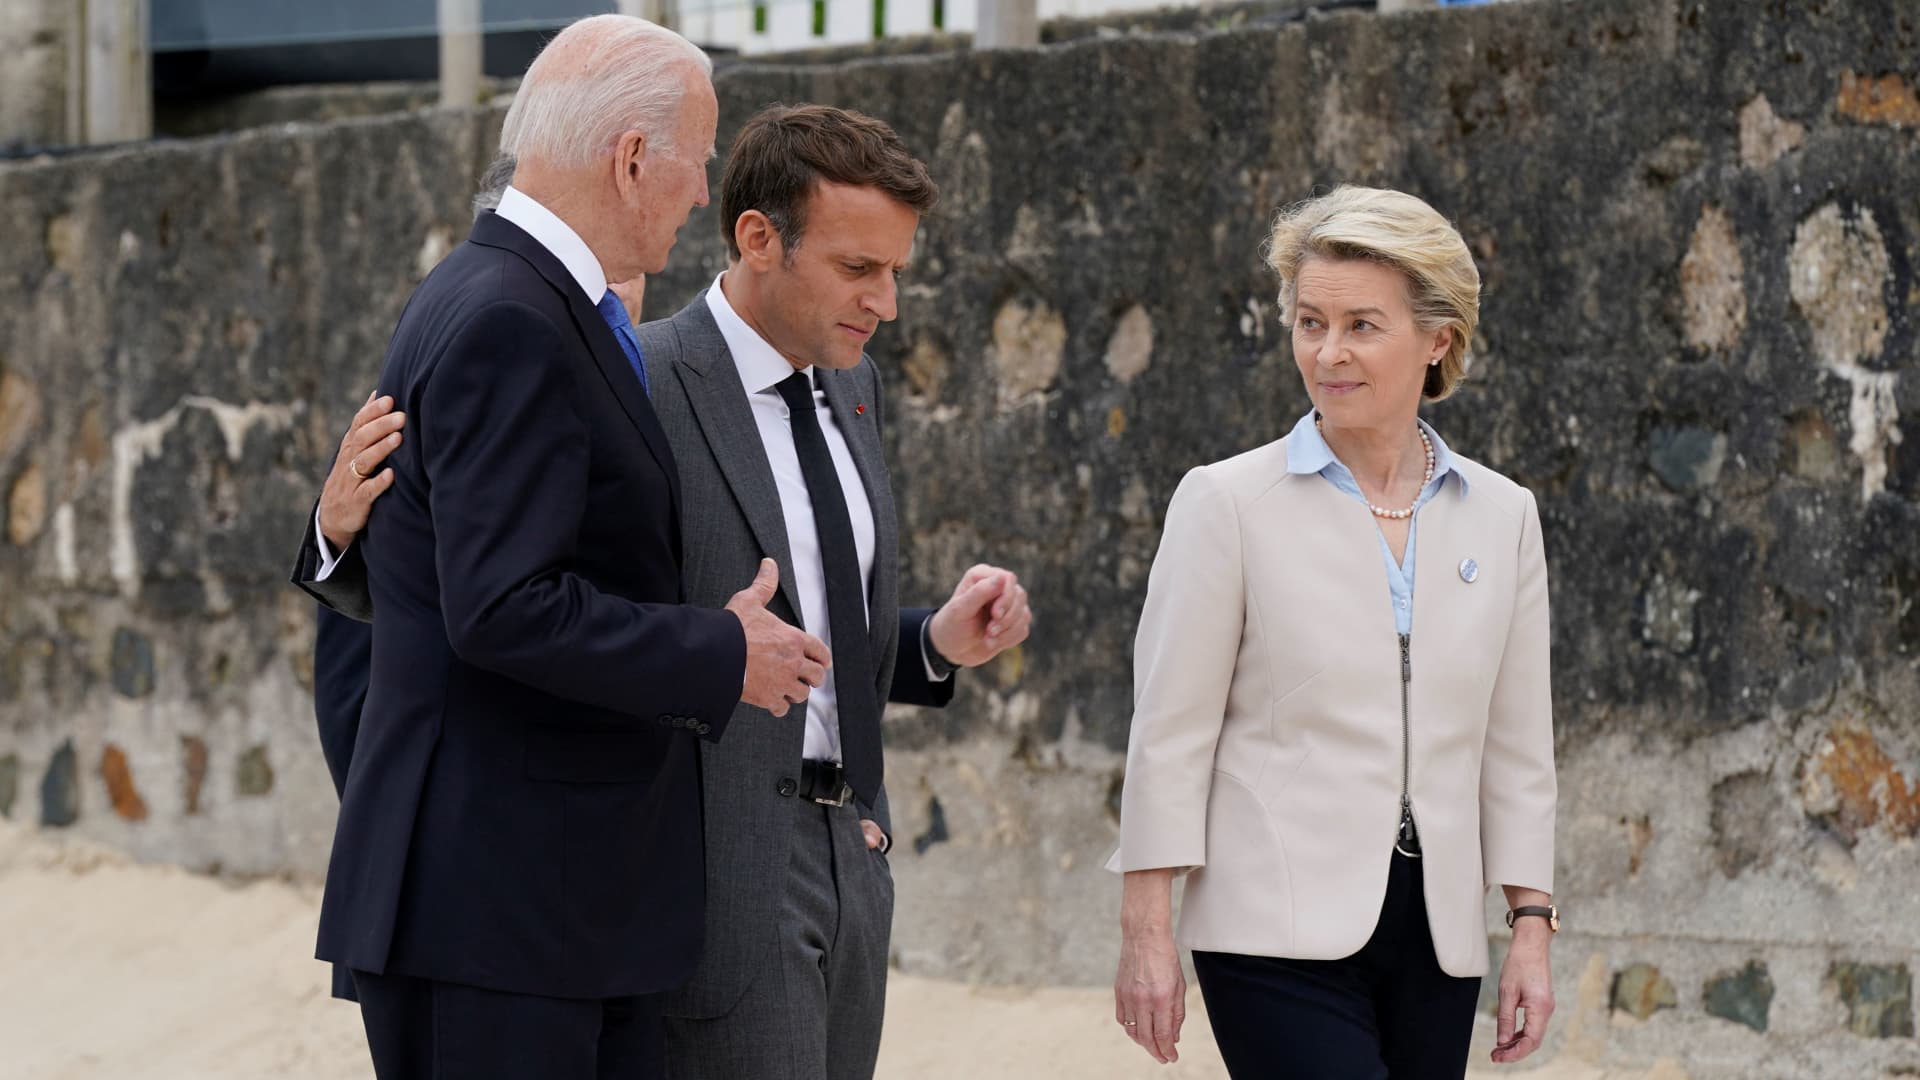 US President Joe Biden (L) and France's President Emmanuel Macron (C) talk with President of the European Commission Ursula von der Leyen after the family photo at the start of the G7 summit in Carbis Bay, Cornwall on June 11, 2021.